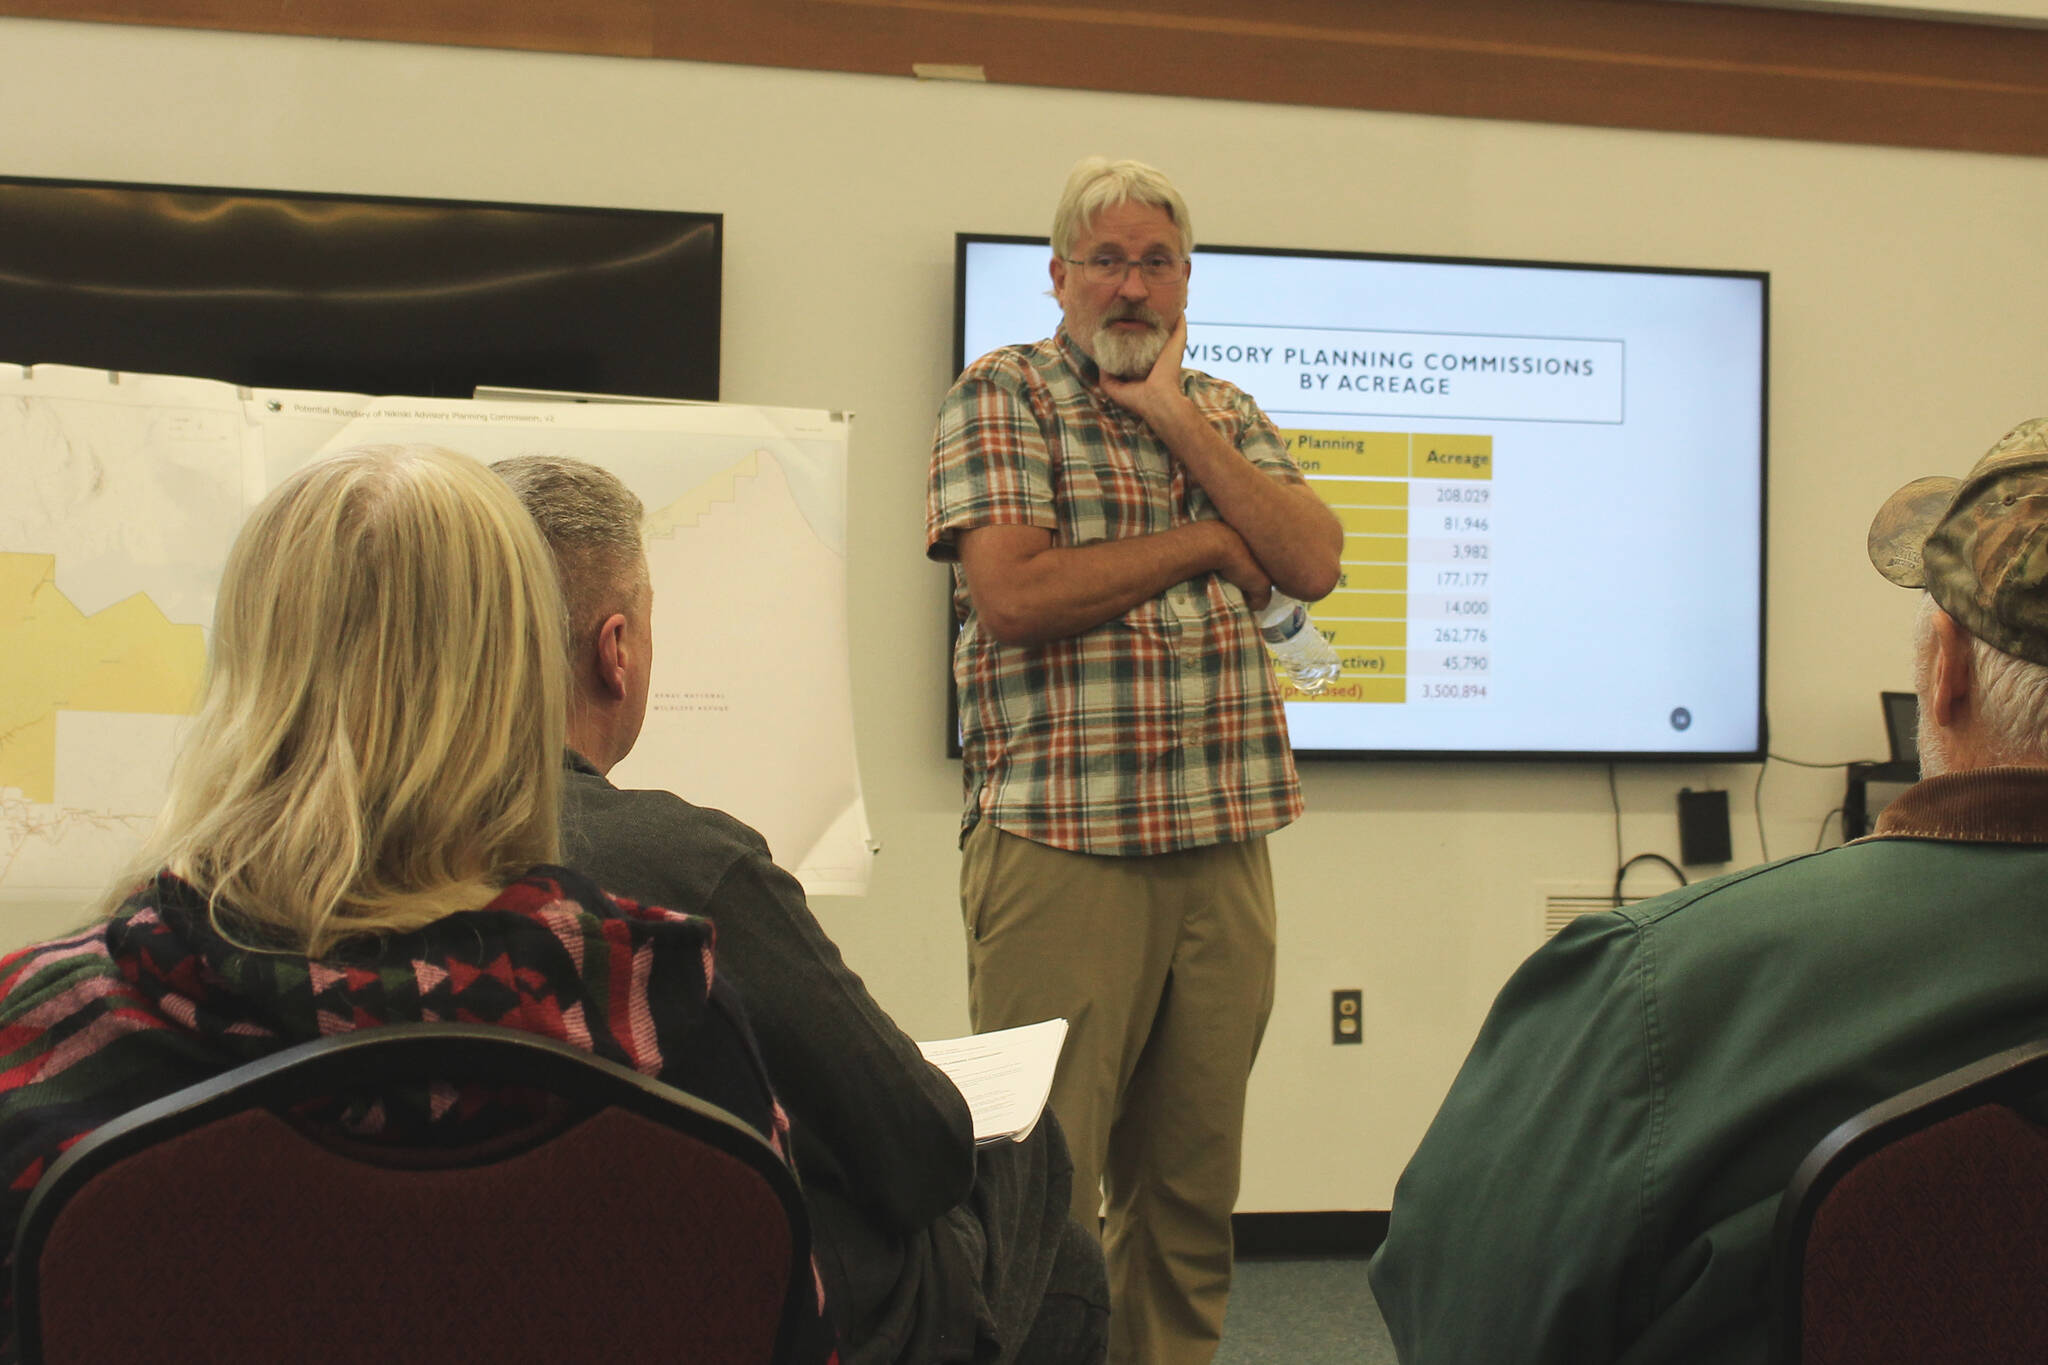 Robert Ruffner fields questions from attendees at a meeting to discuss the potential boundaries of a Nikiski Advisory Planning Commission at the Nikiski Community Recreation Center on Tuesday, July 19, 2022, in Nikiski, Alaska. (Ashlyn O’Hara/Peninsula Clarion)